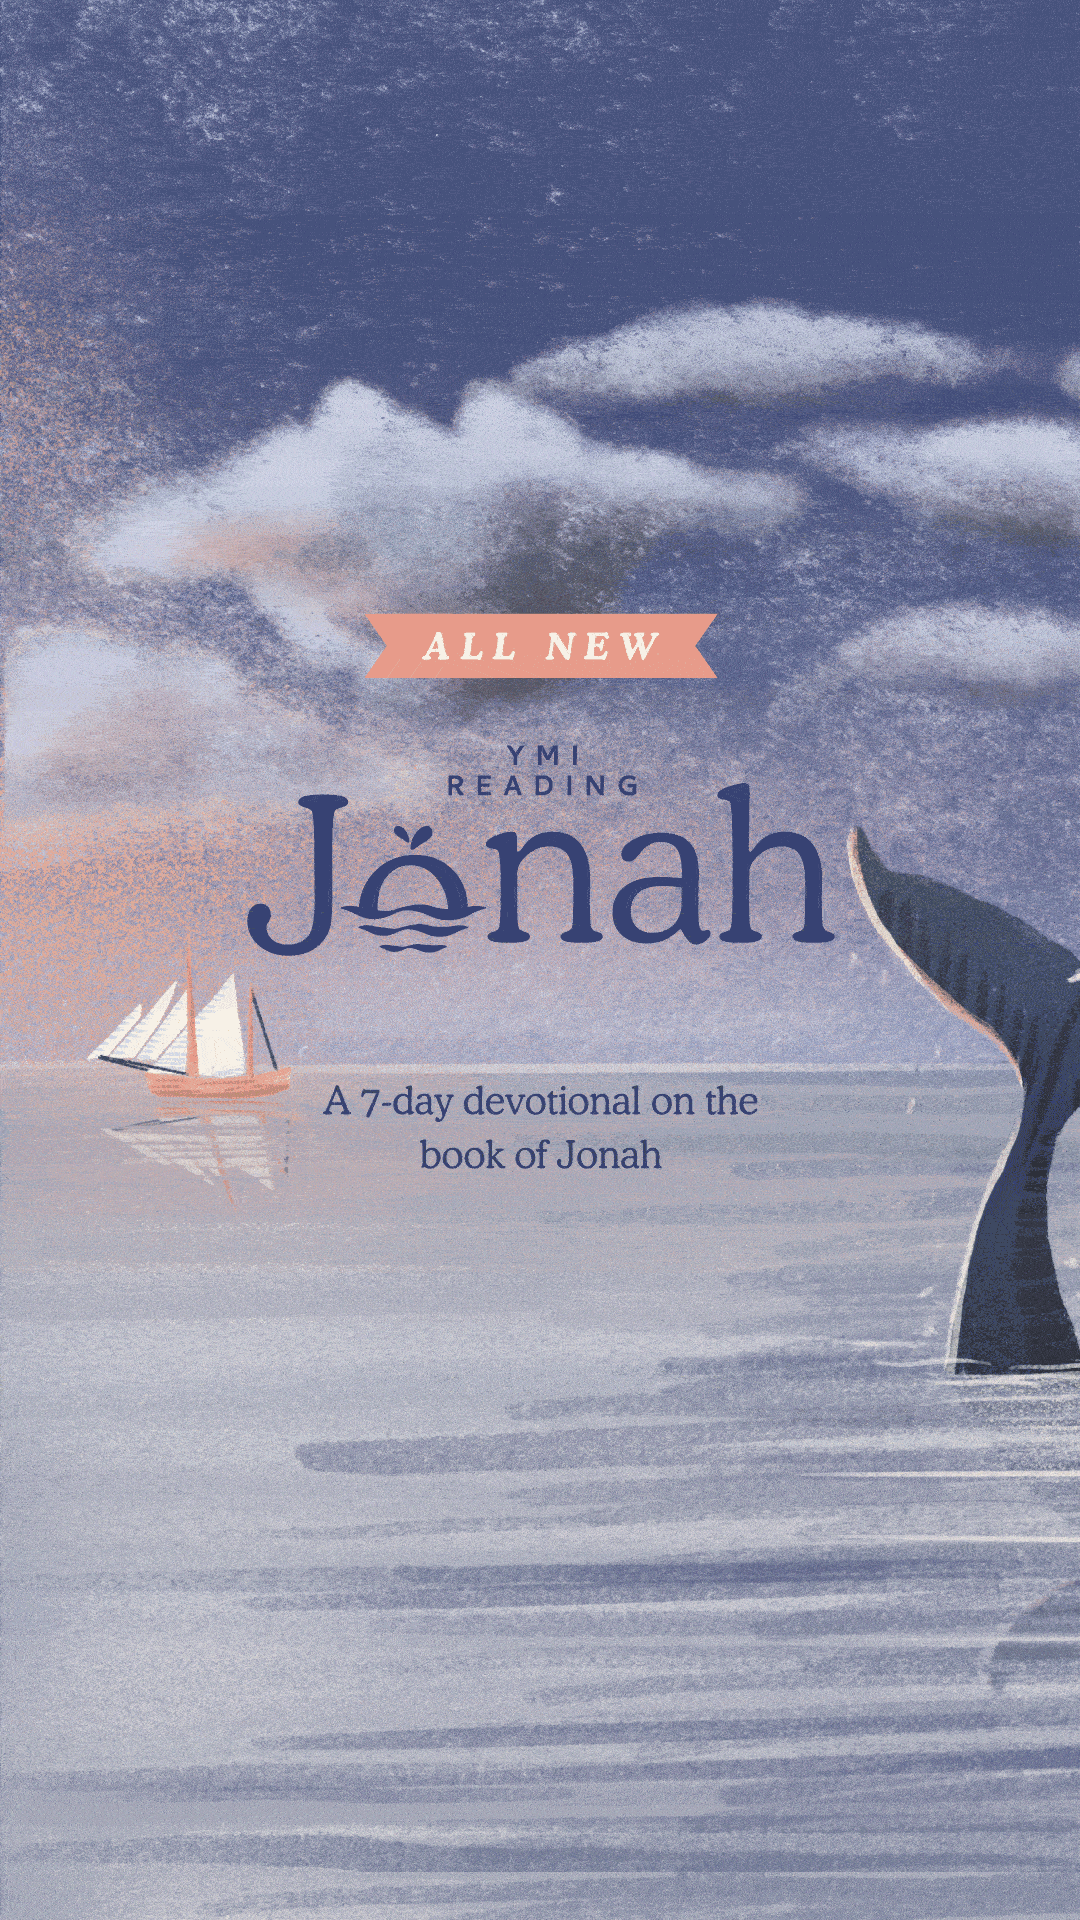 YMI Reading Jonah. A 7-day devotional on the book of Jonah.